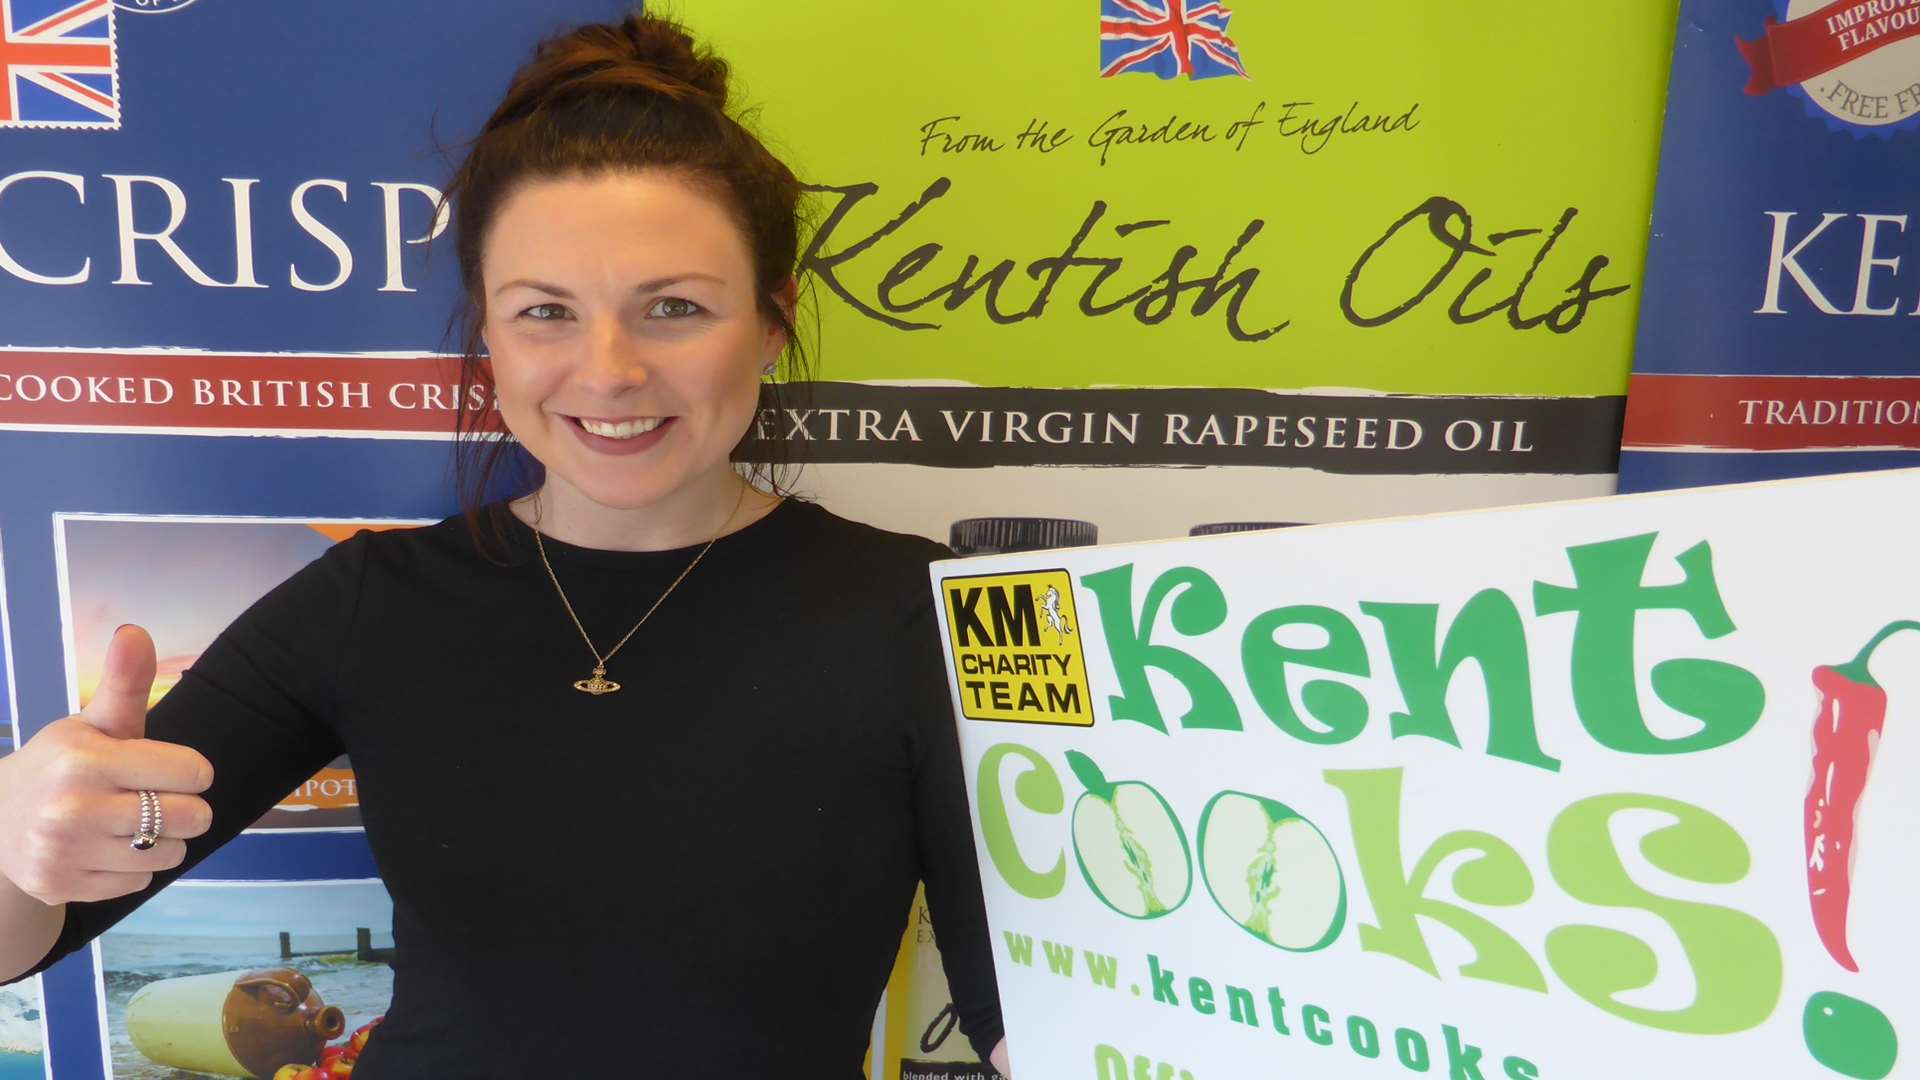 Laura Bounds of Kent Crisps and Kentish Oils announces support for Kent’s official school cookery contest, Kent Cooks.